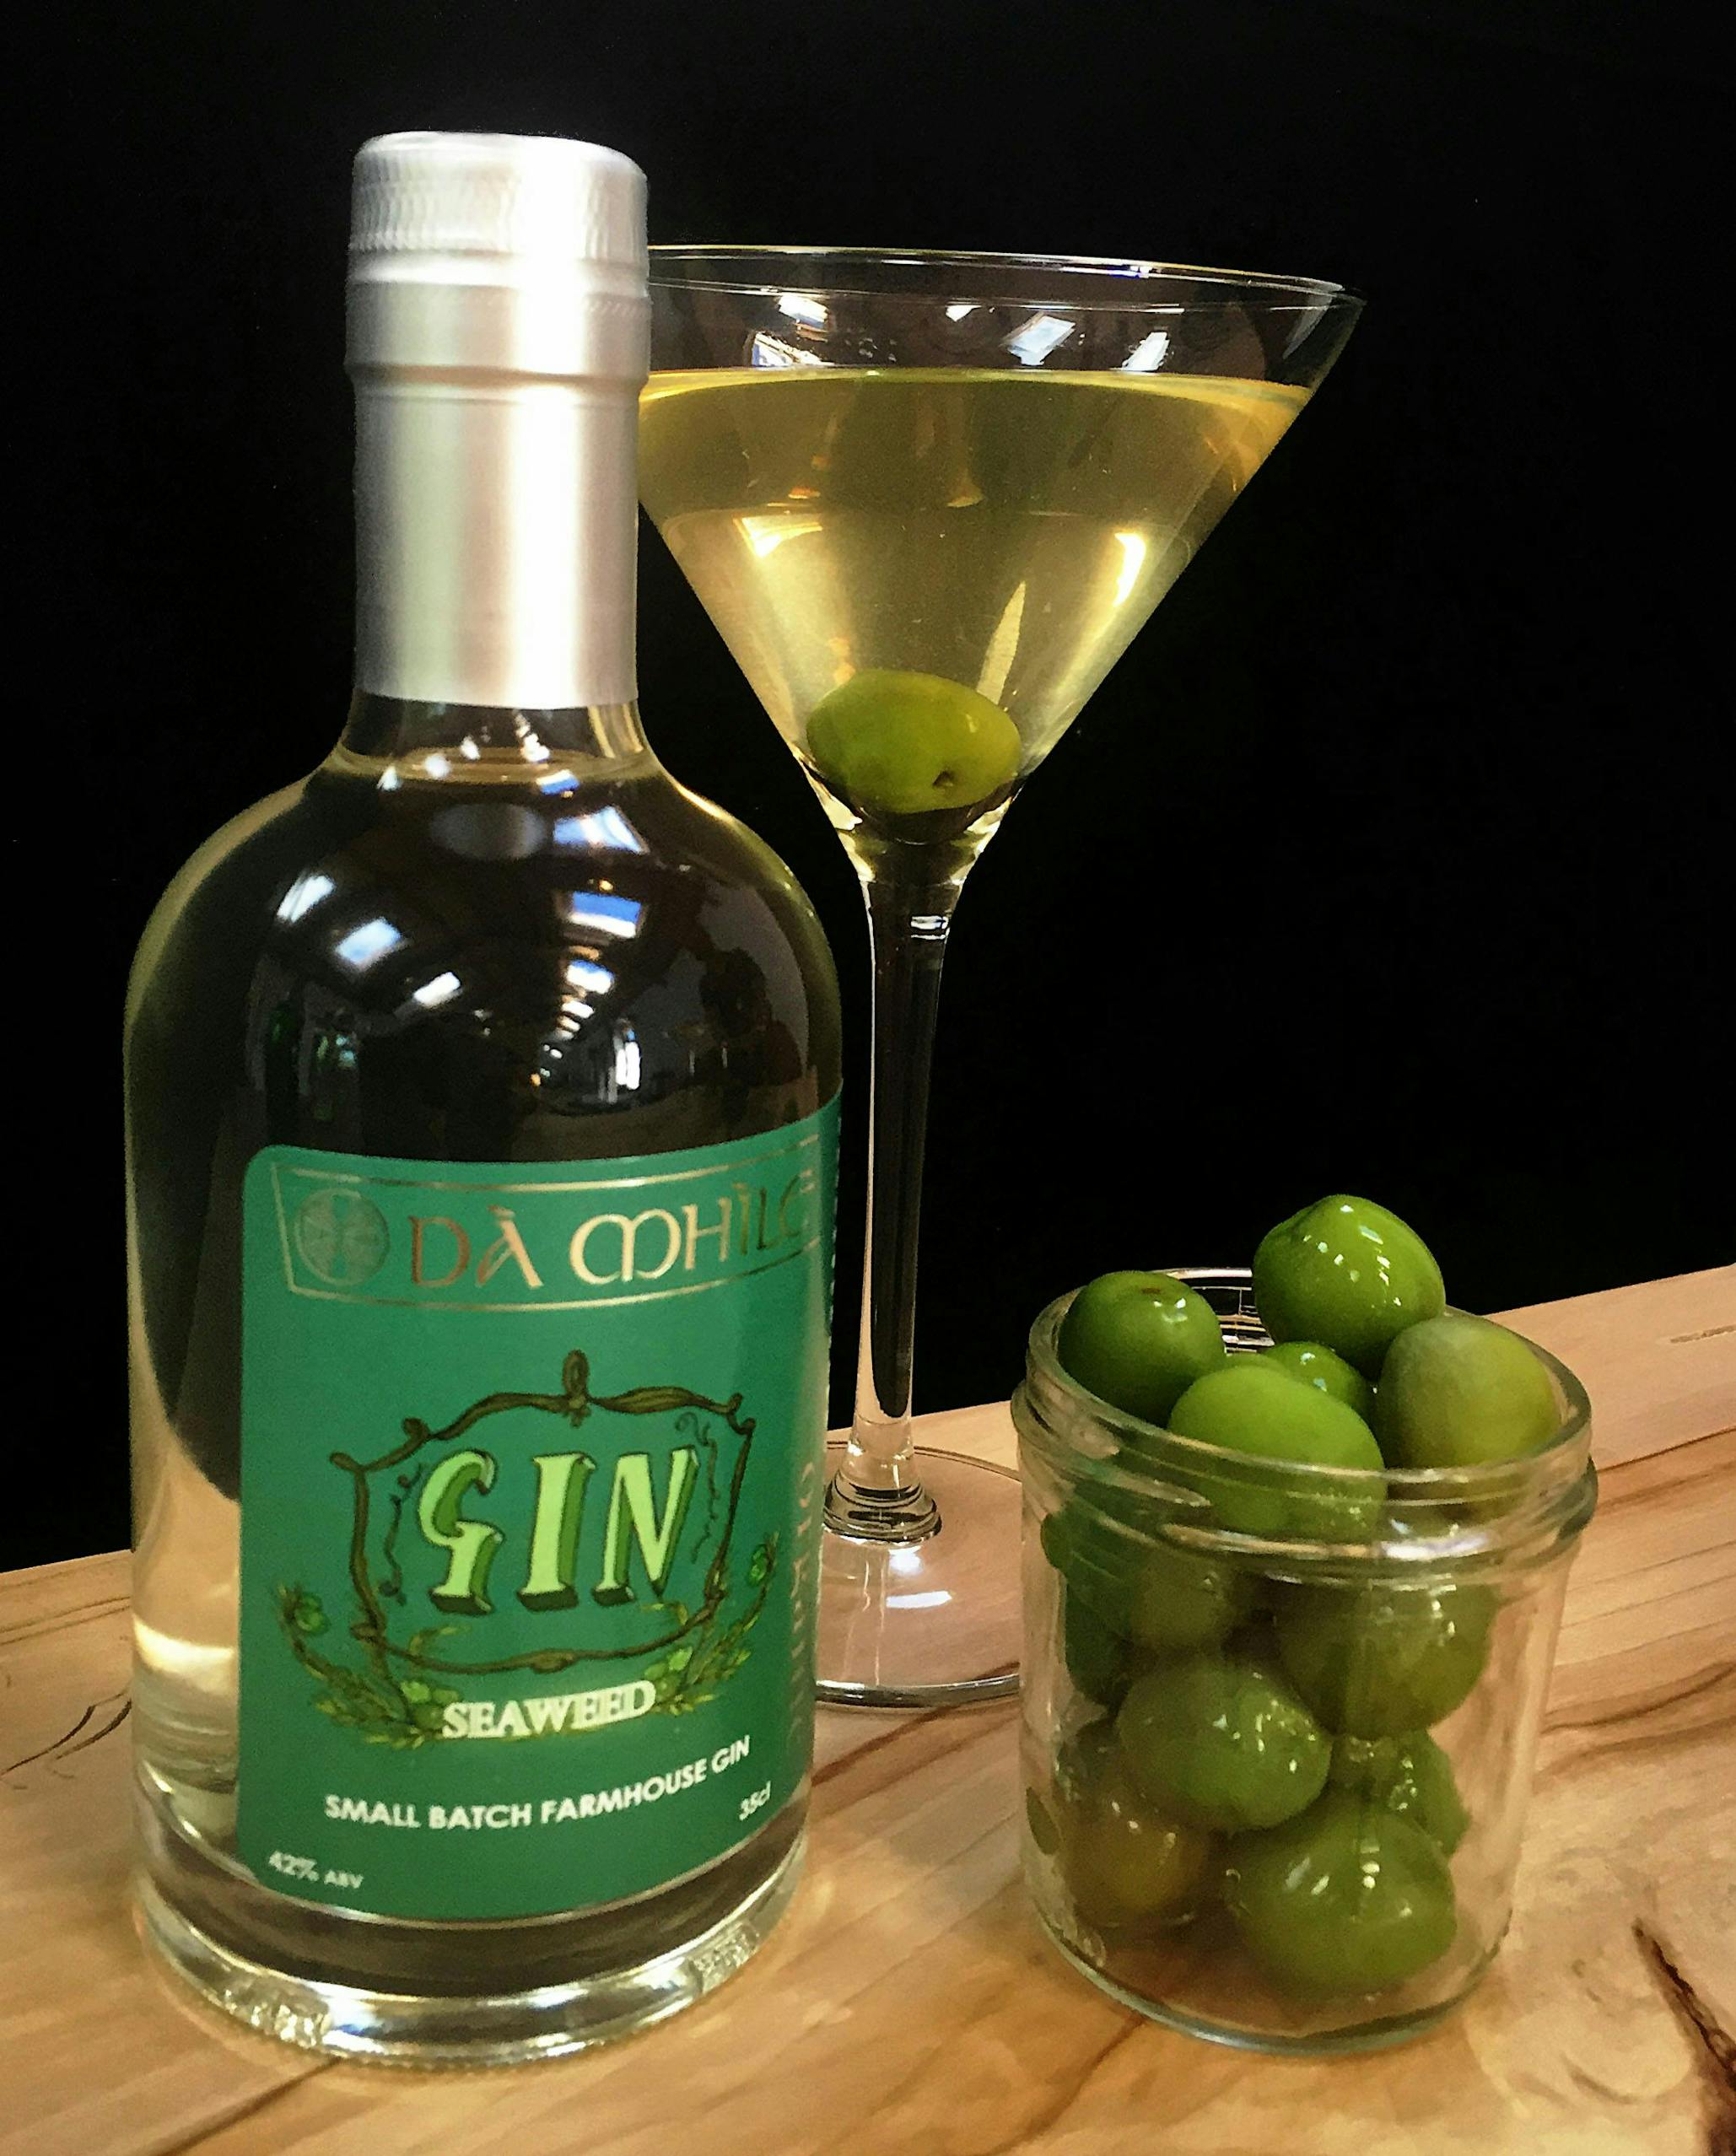 Cocktail of the Week: Da Mhile Distillery's Dirty Martini and its Wilde imagination